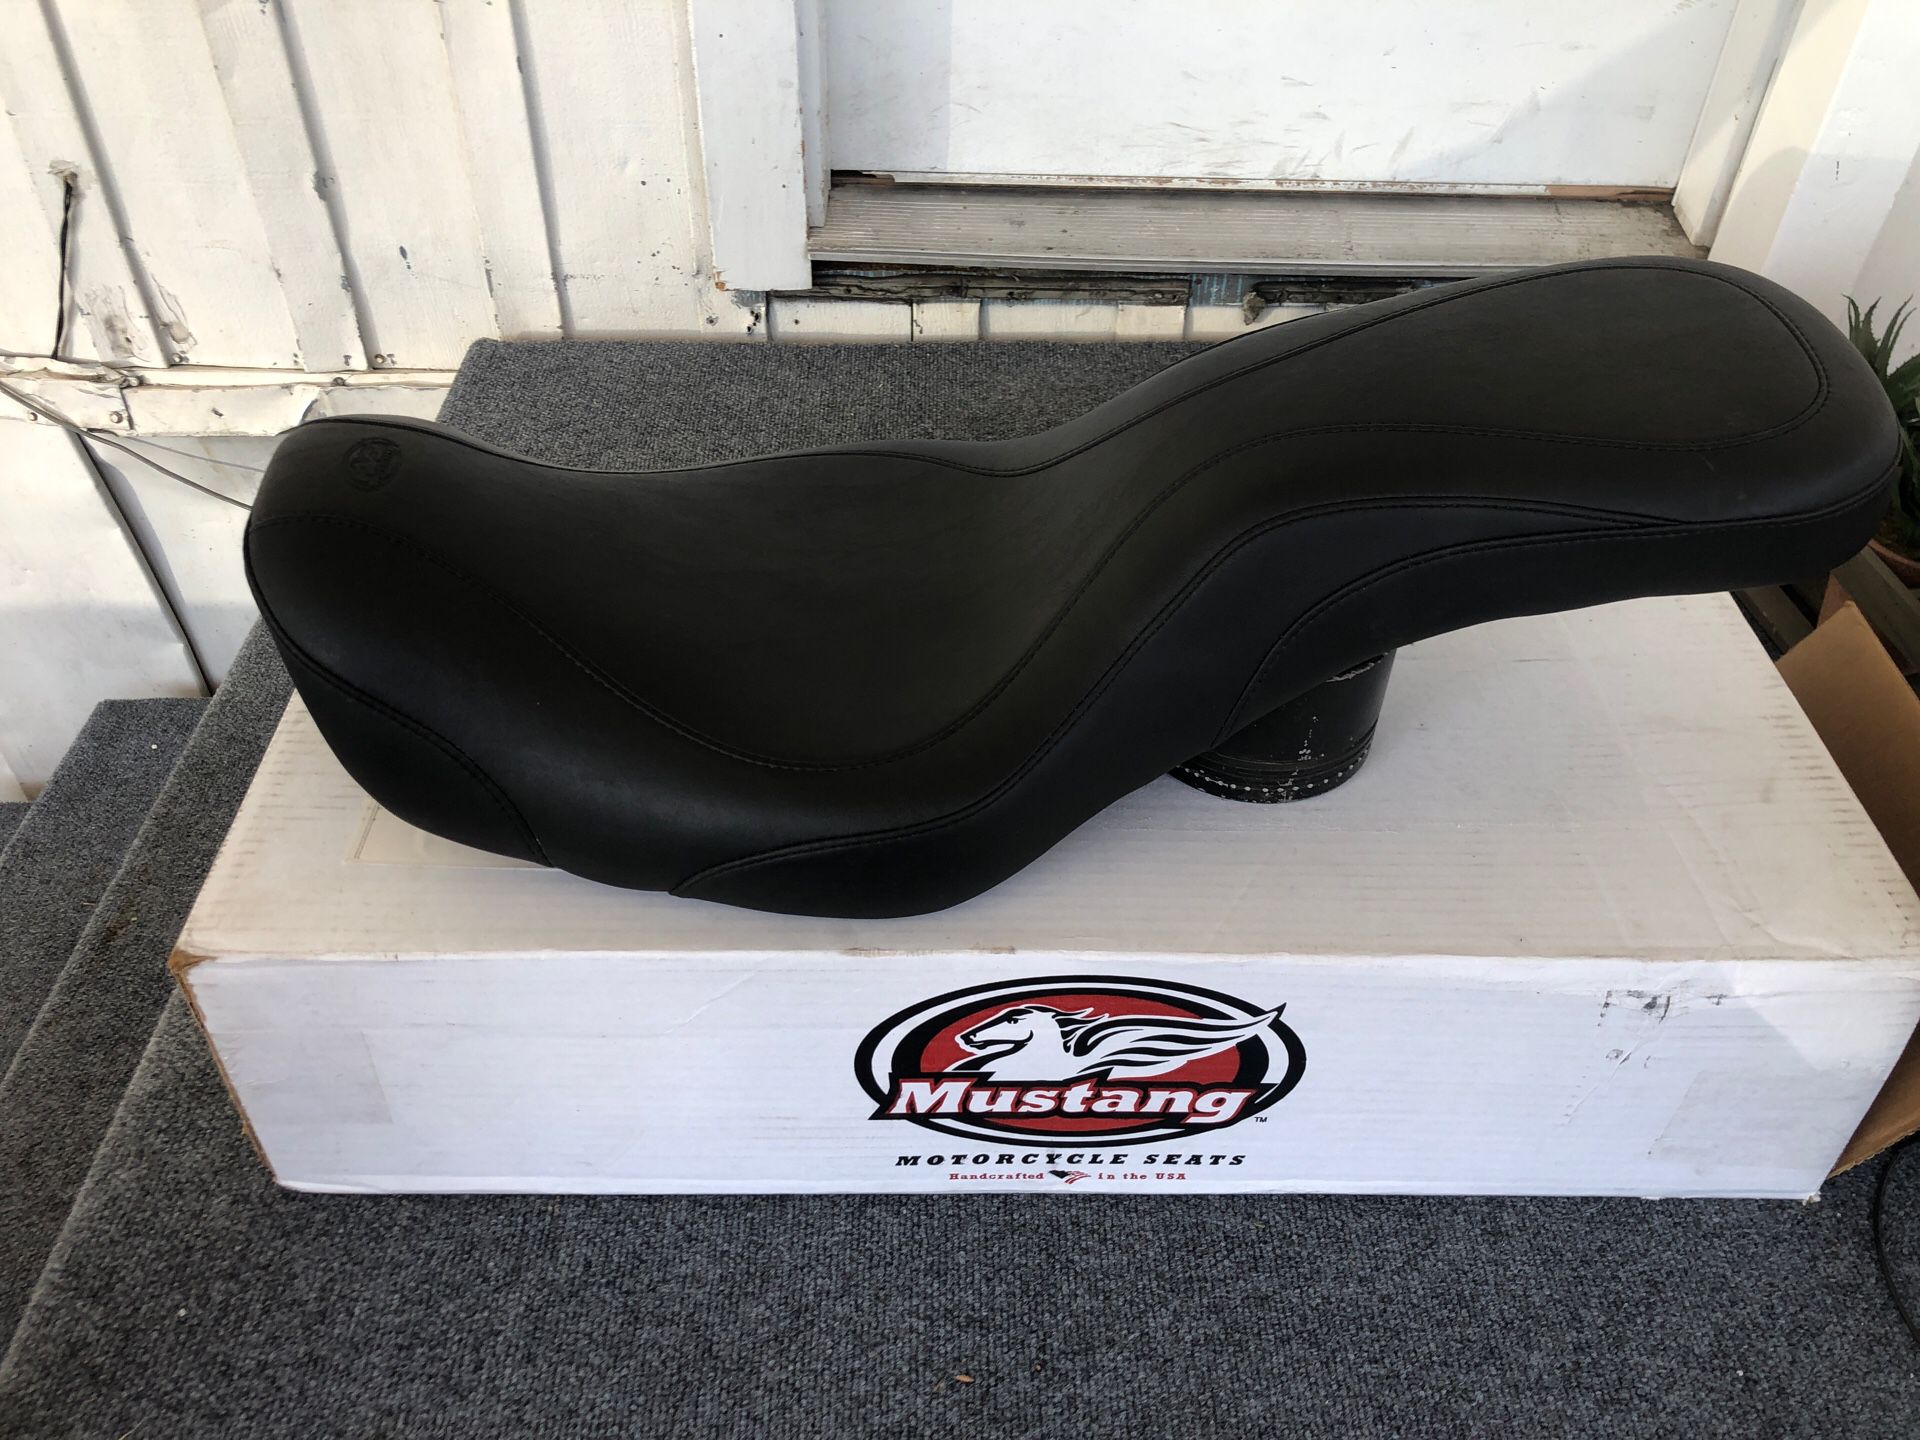 Dyna and wide glide seat day tripper 06-17Dyna part number 75625